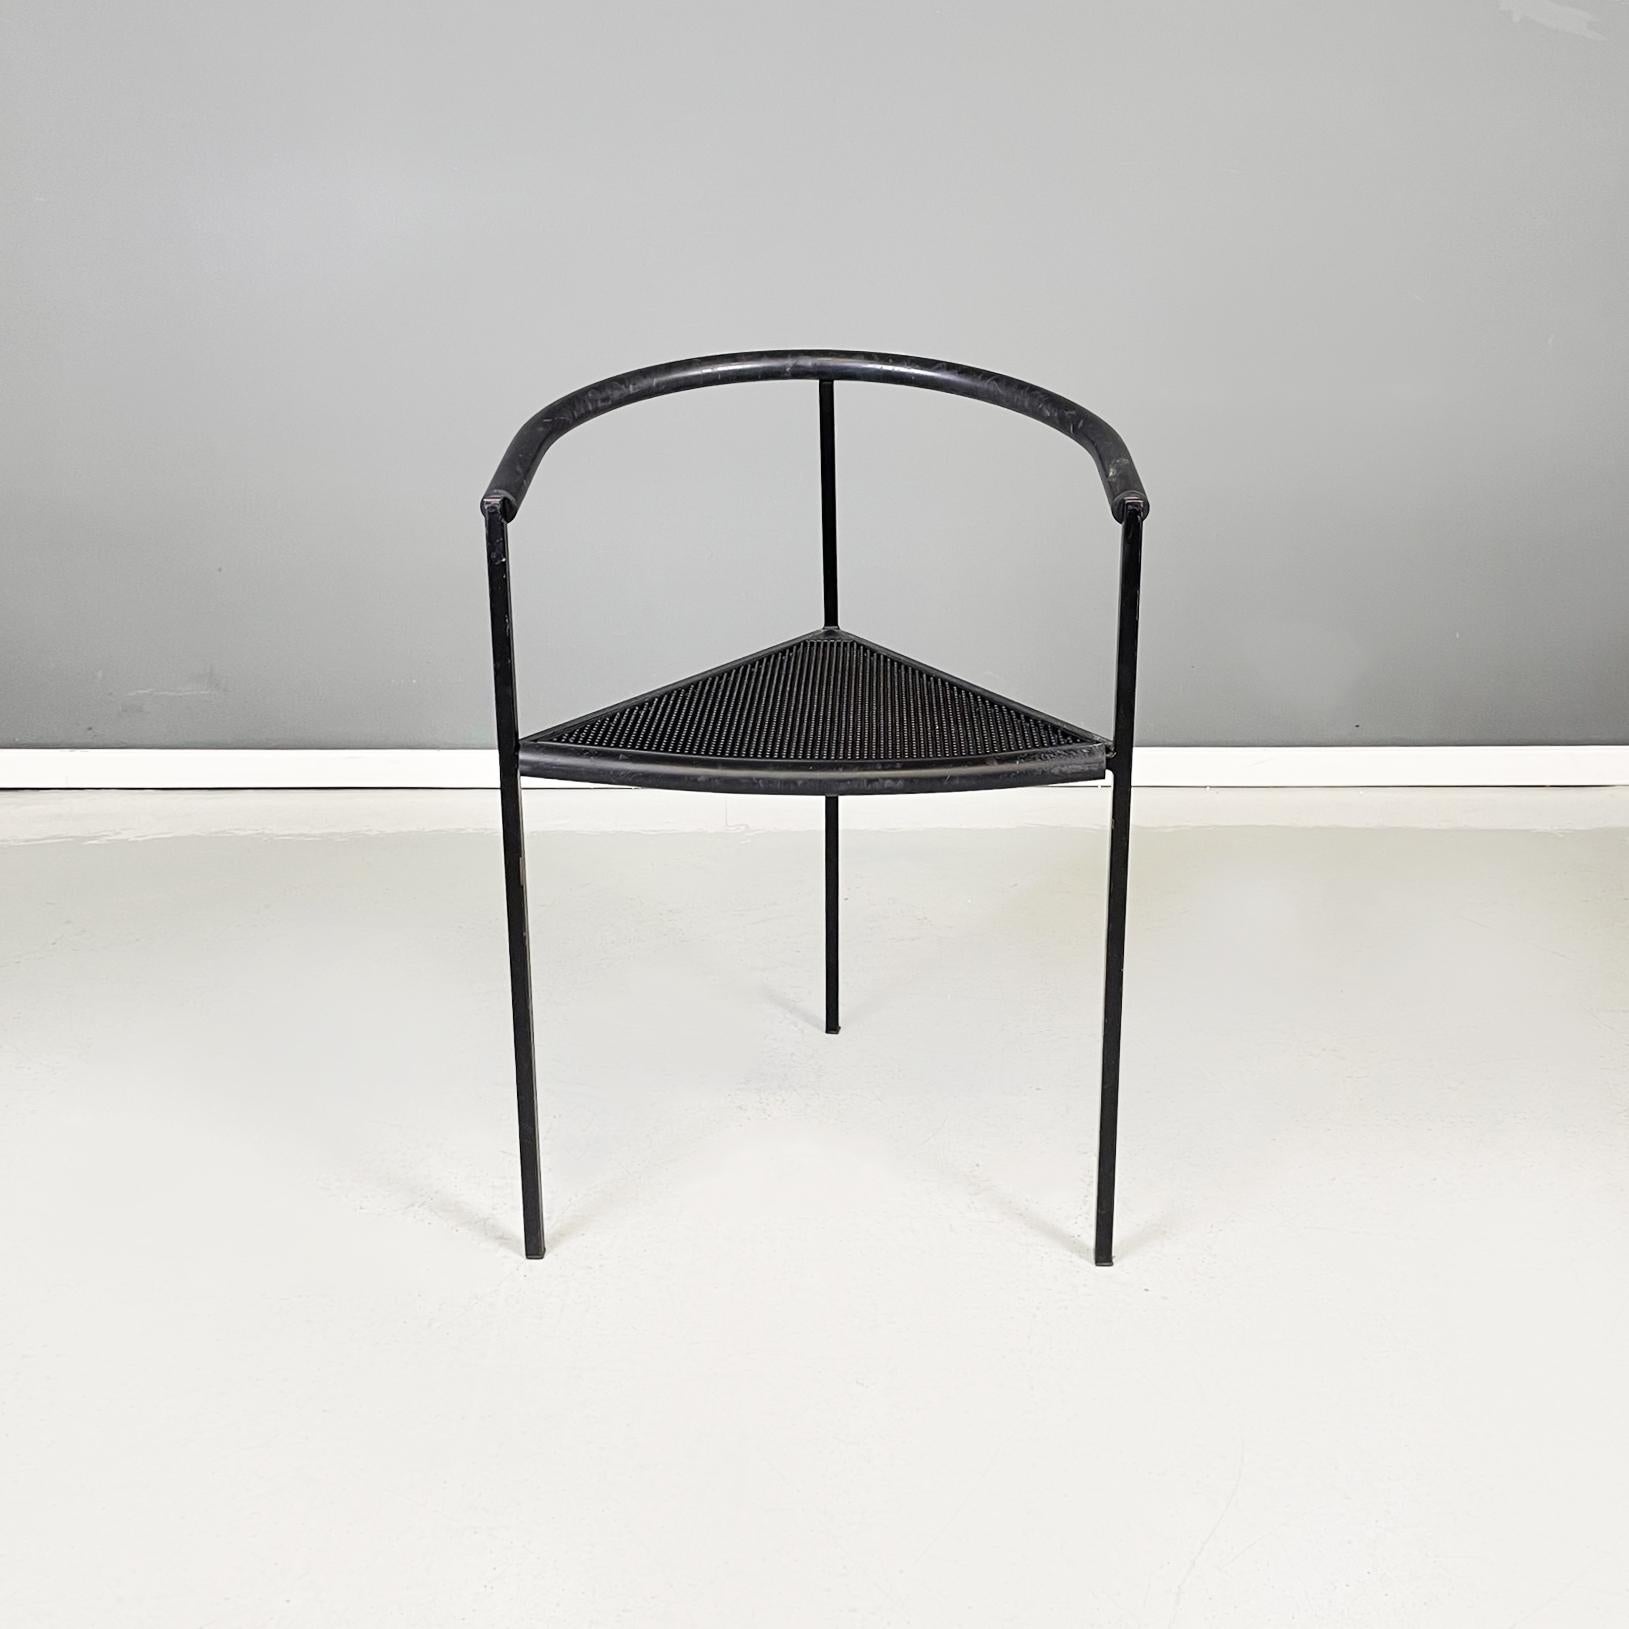 Italian modern Black metal and rubber Chair by Peregalli and Calatroni for Zeus, 1990s
Chair with triangular seat in textured black rubber. The structure has a square section in matt black painted steel. The chair has backrest and armrests covered